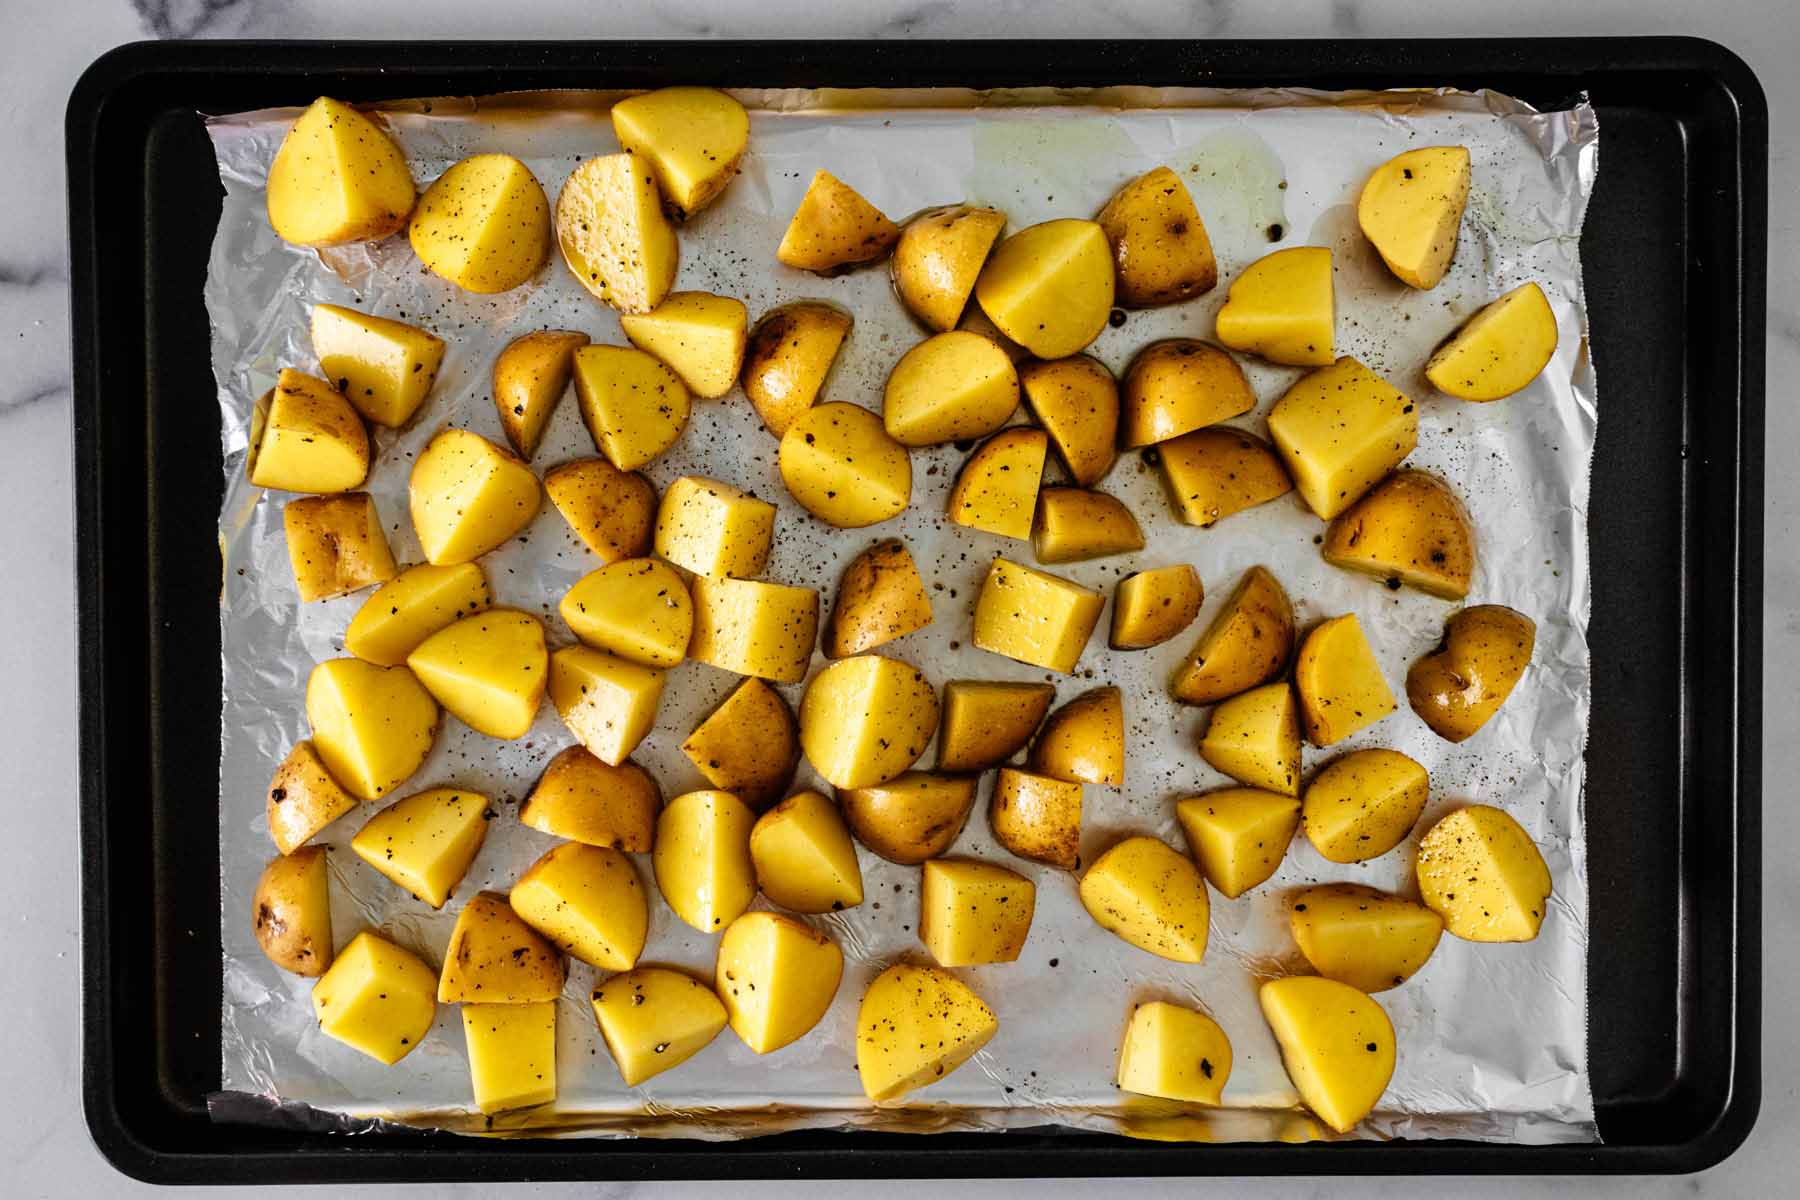 Chopped potatoes are spread on a tray lined with foil.